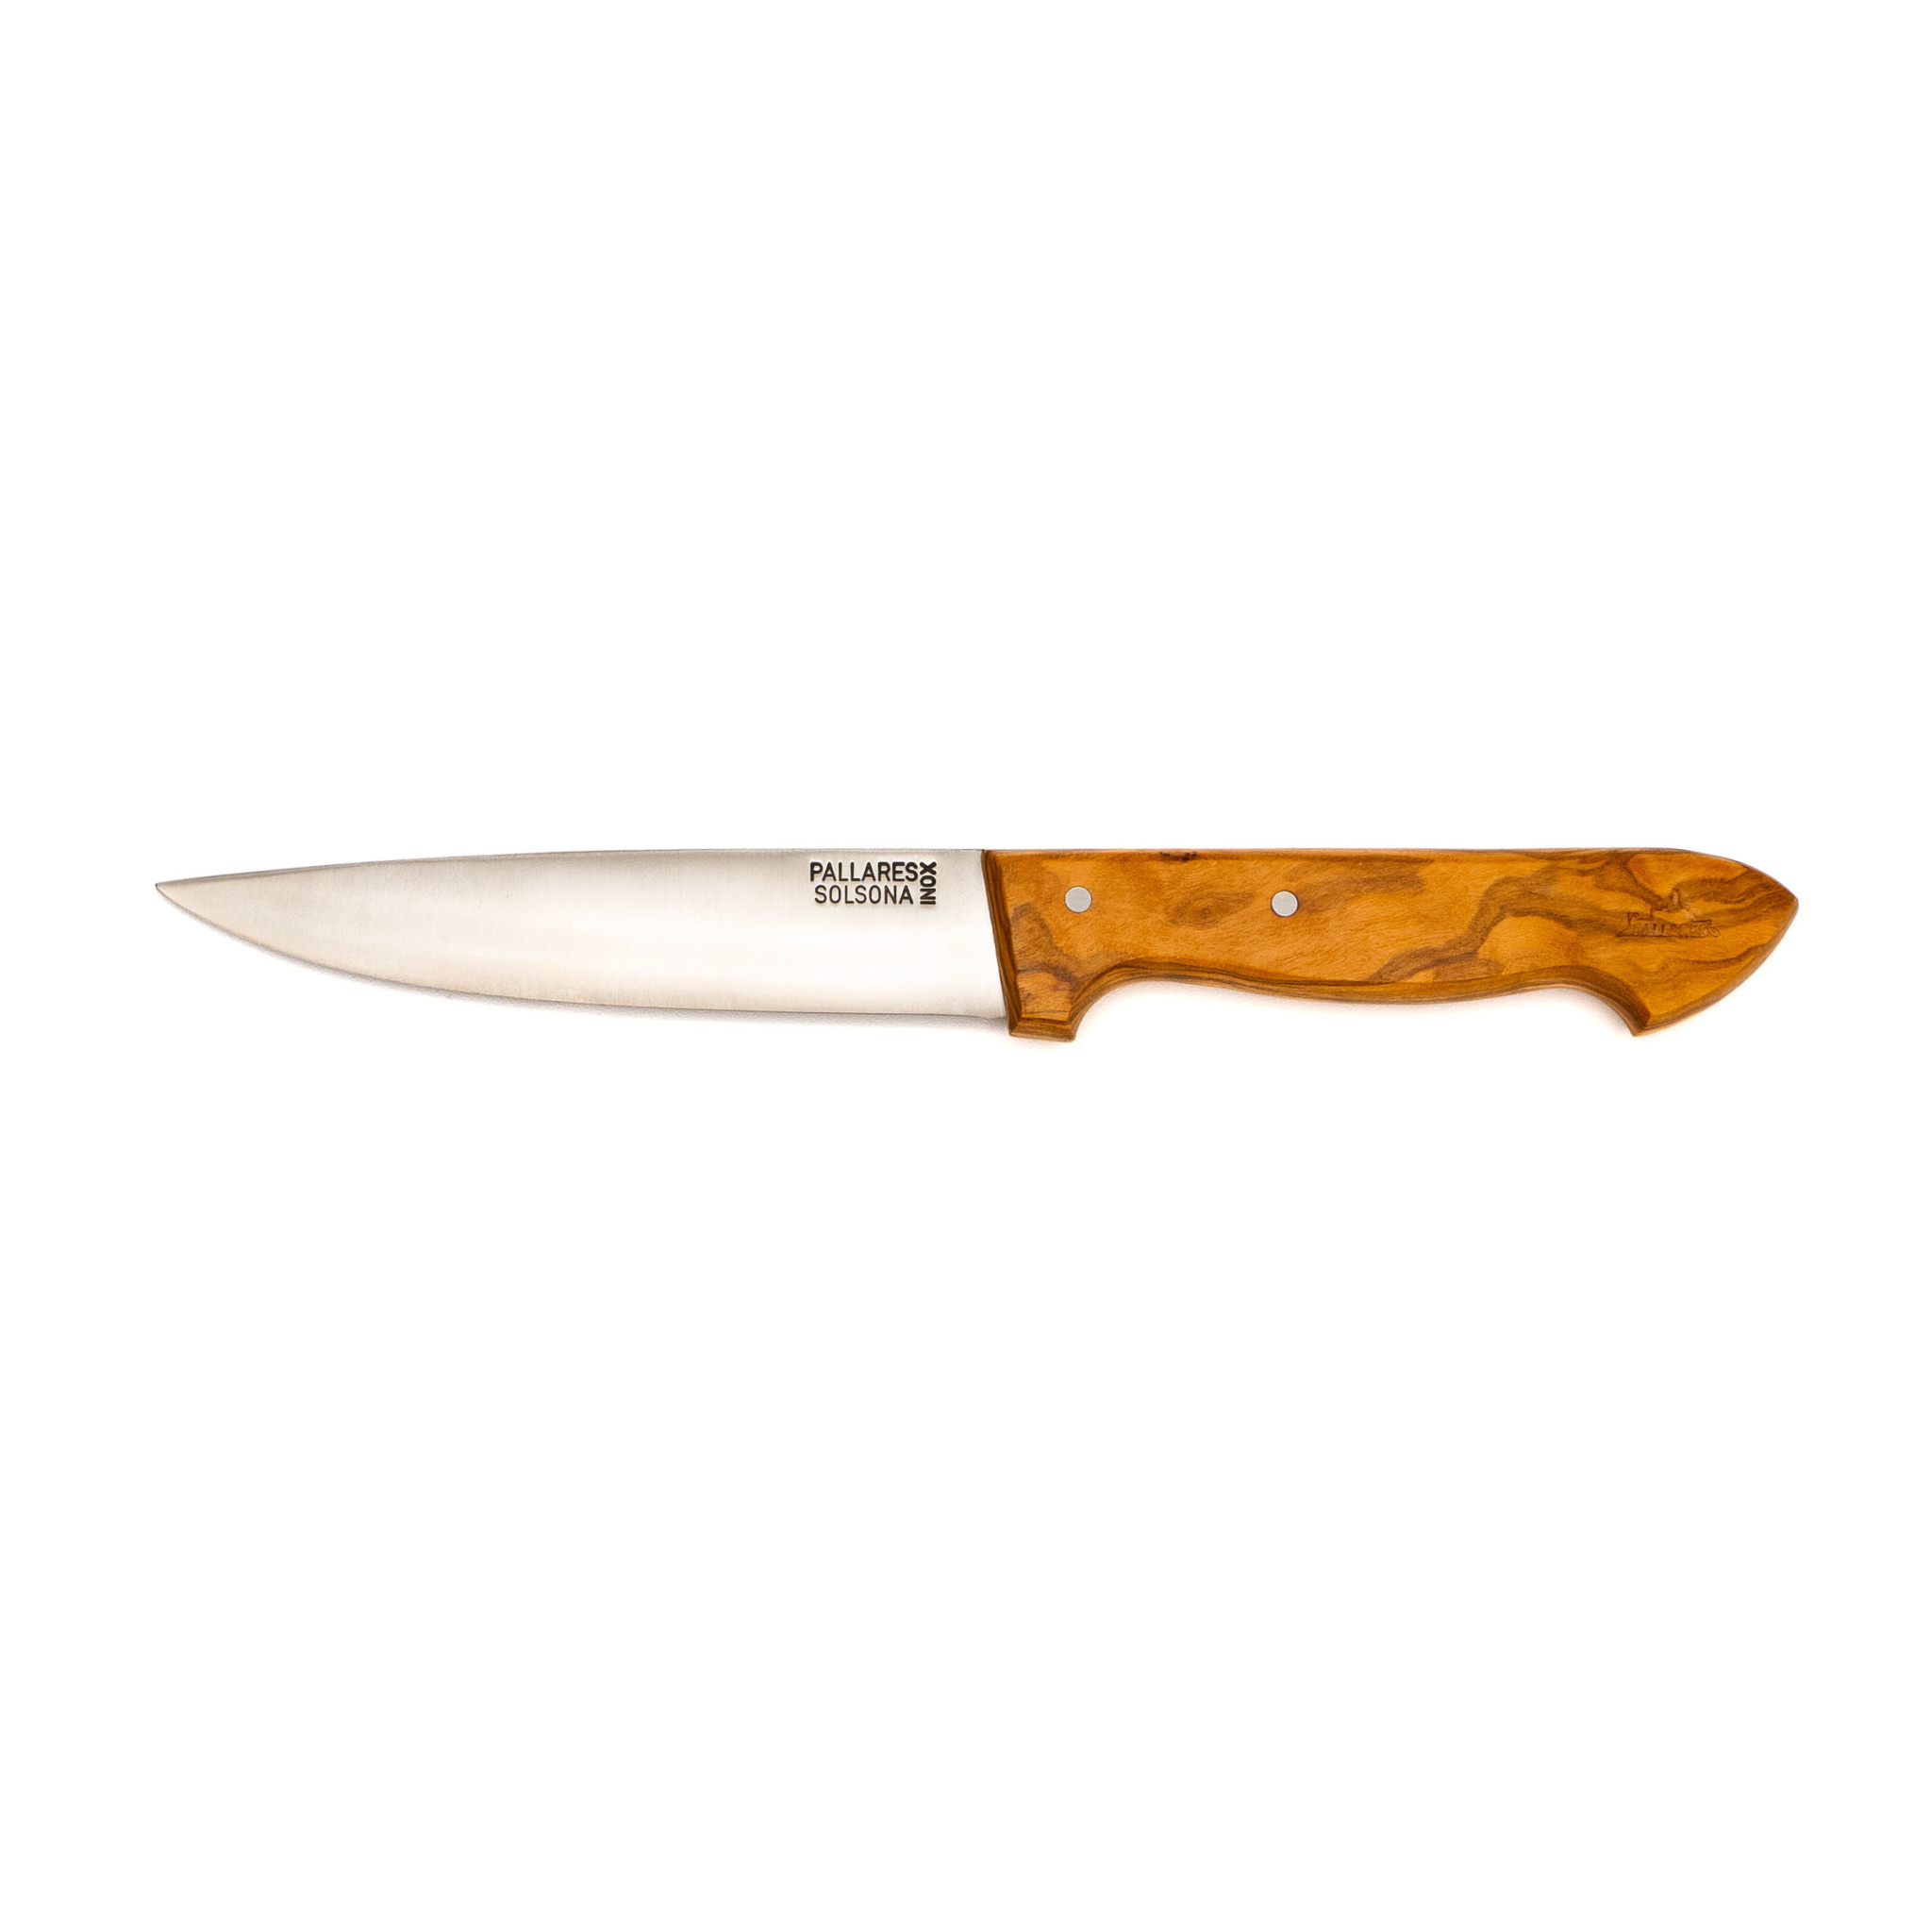 Pallares Solsona classic kitchen knife, stainless, 11cm